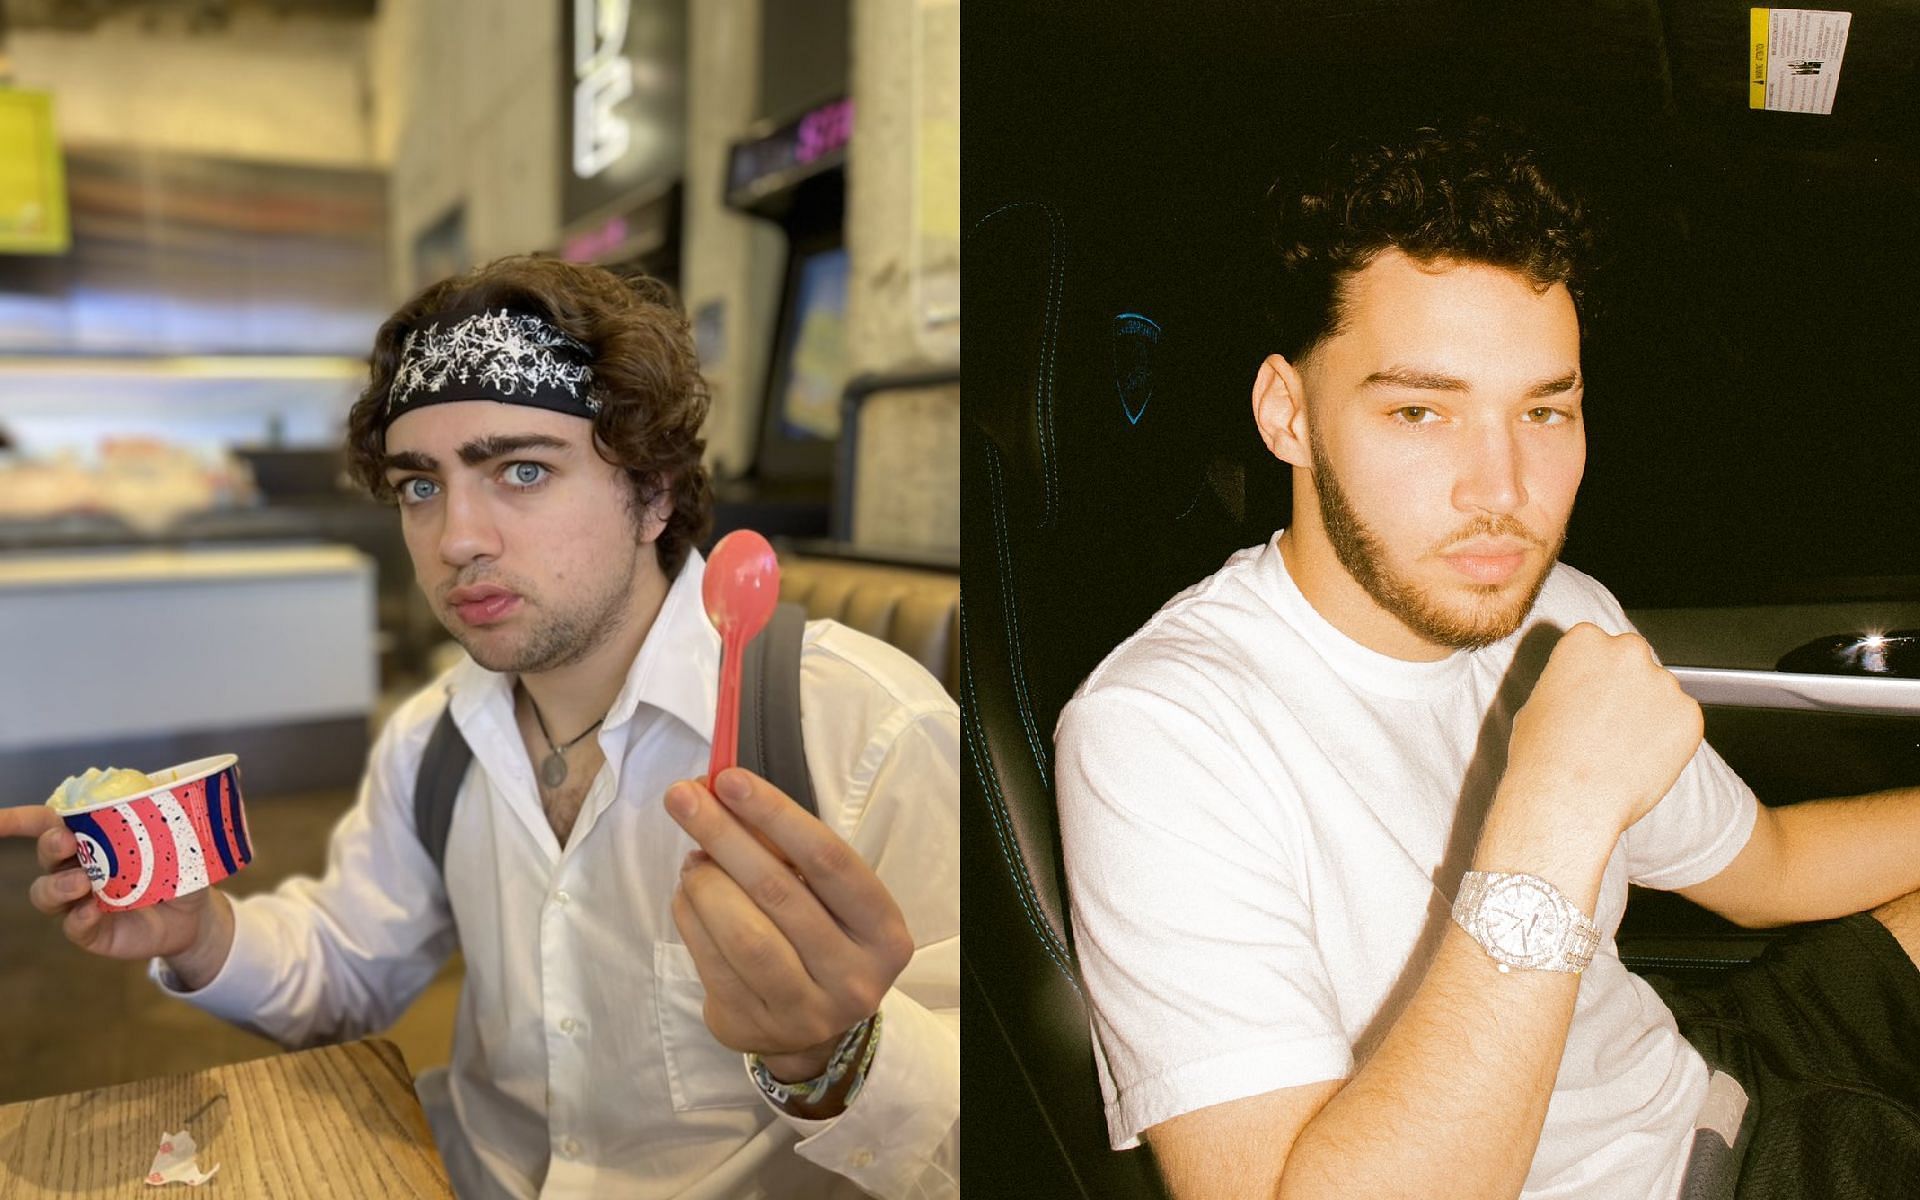 Mizkif reacts to a YouTube video and provides his take on Adin Ross (Images via Mizkif and Adin Ross/Twitter)